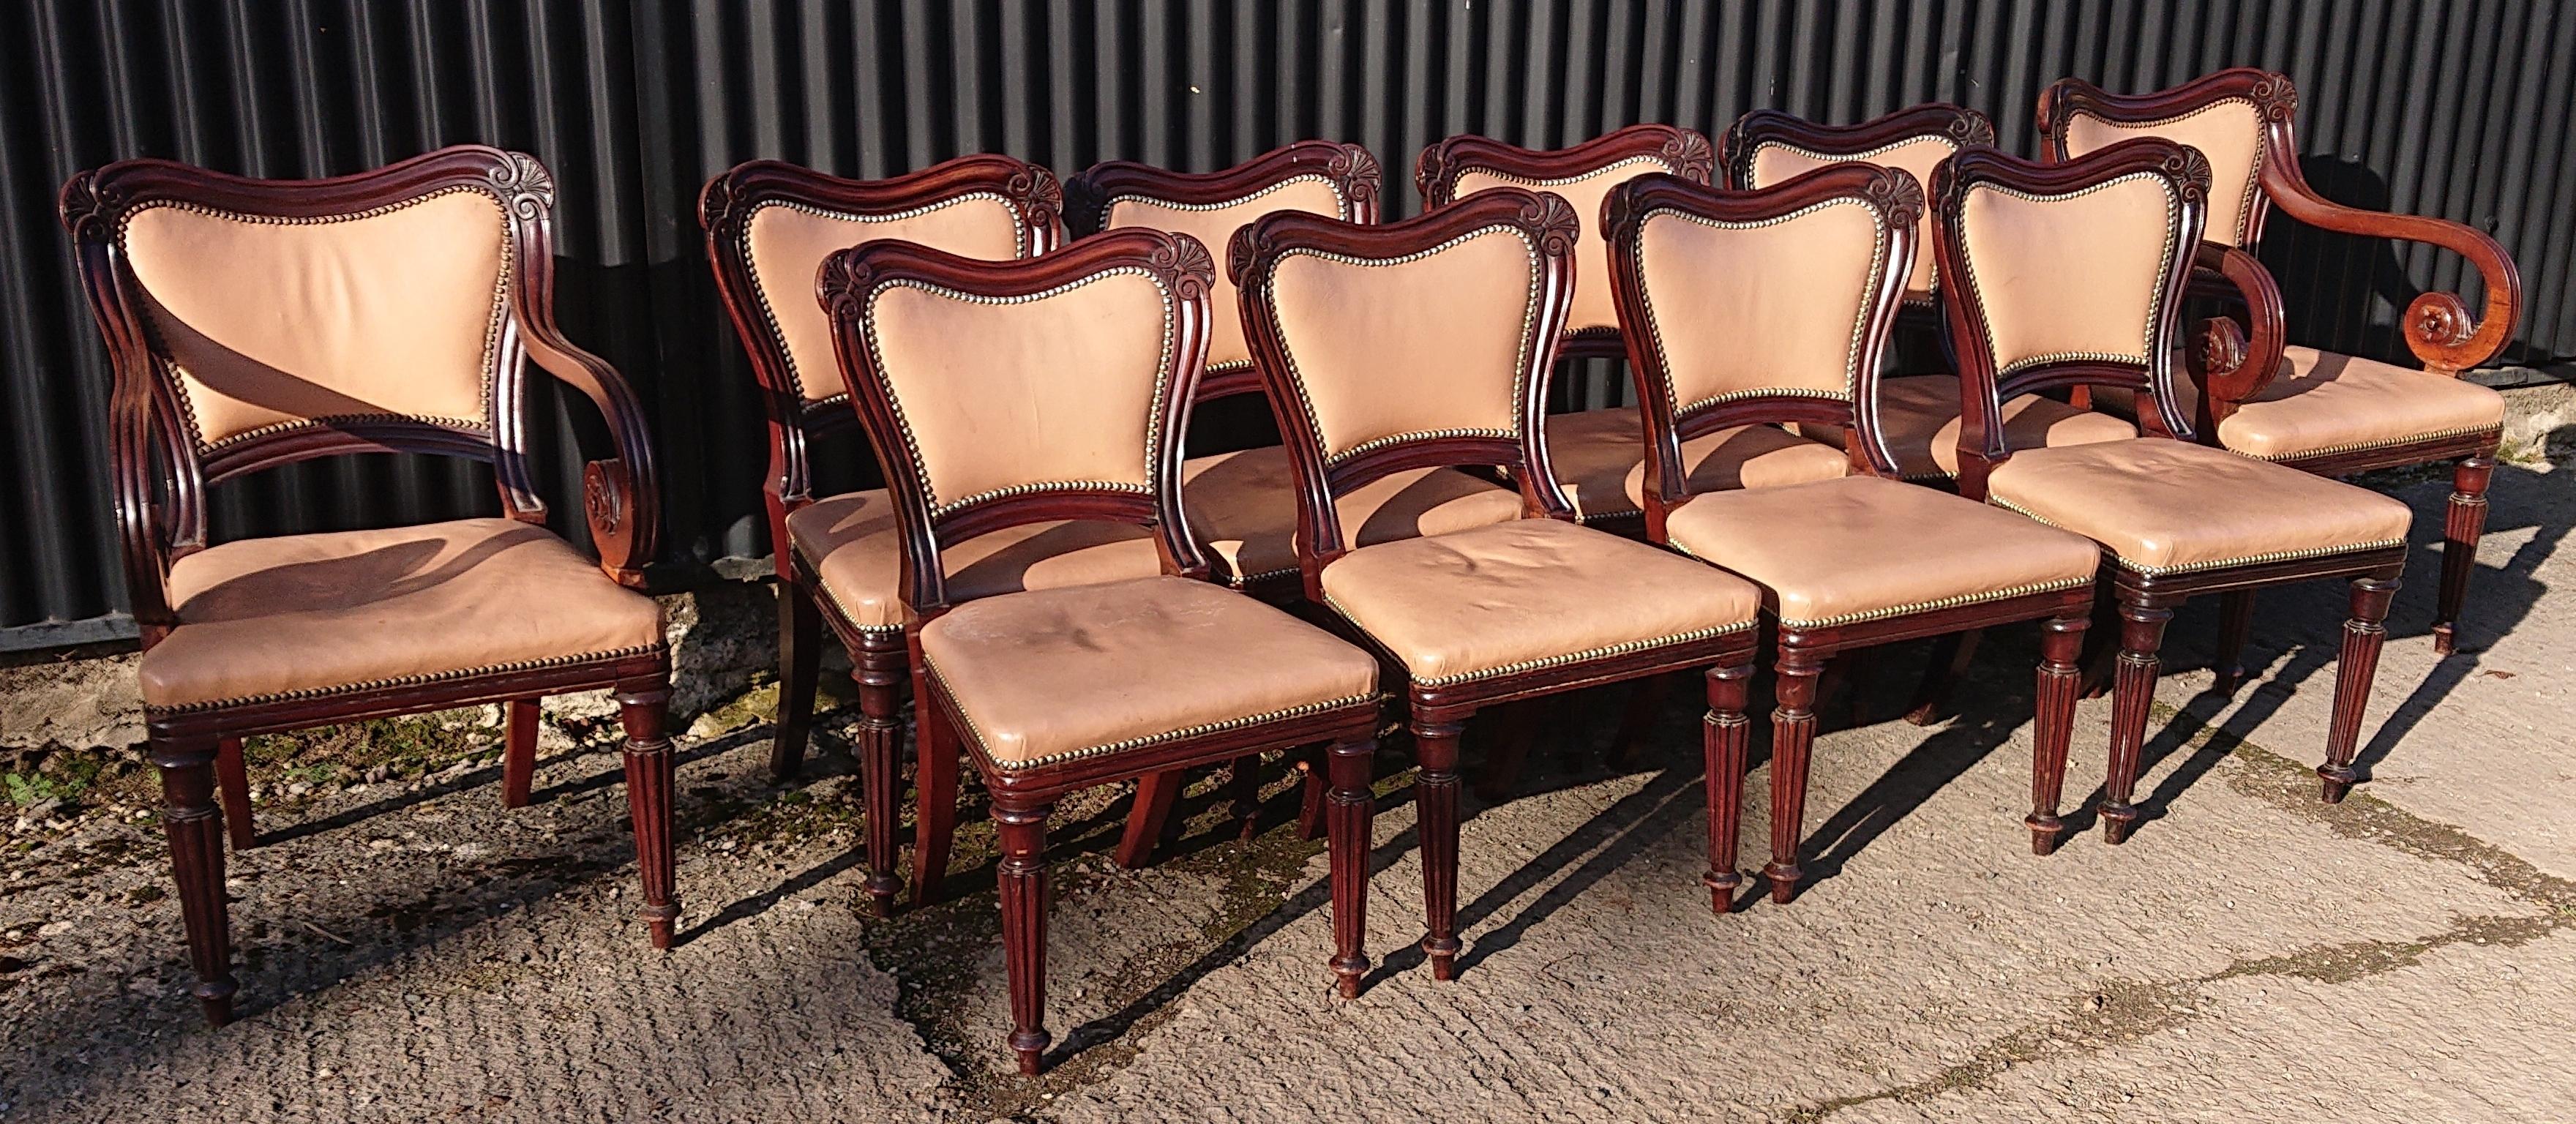 Very fine set of ten antique dining chairs firmly attributed to Gillow of Lancaster and London. This is a very fine set of chairs, they are well made, crisply carved and they are a good scale. The design is straight from the Gillow design book with